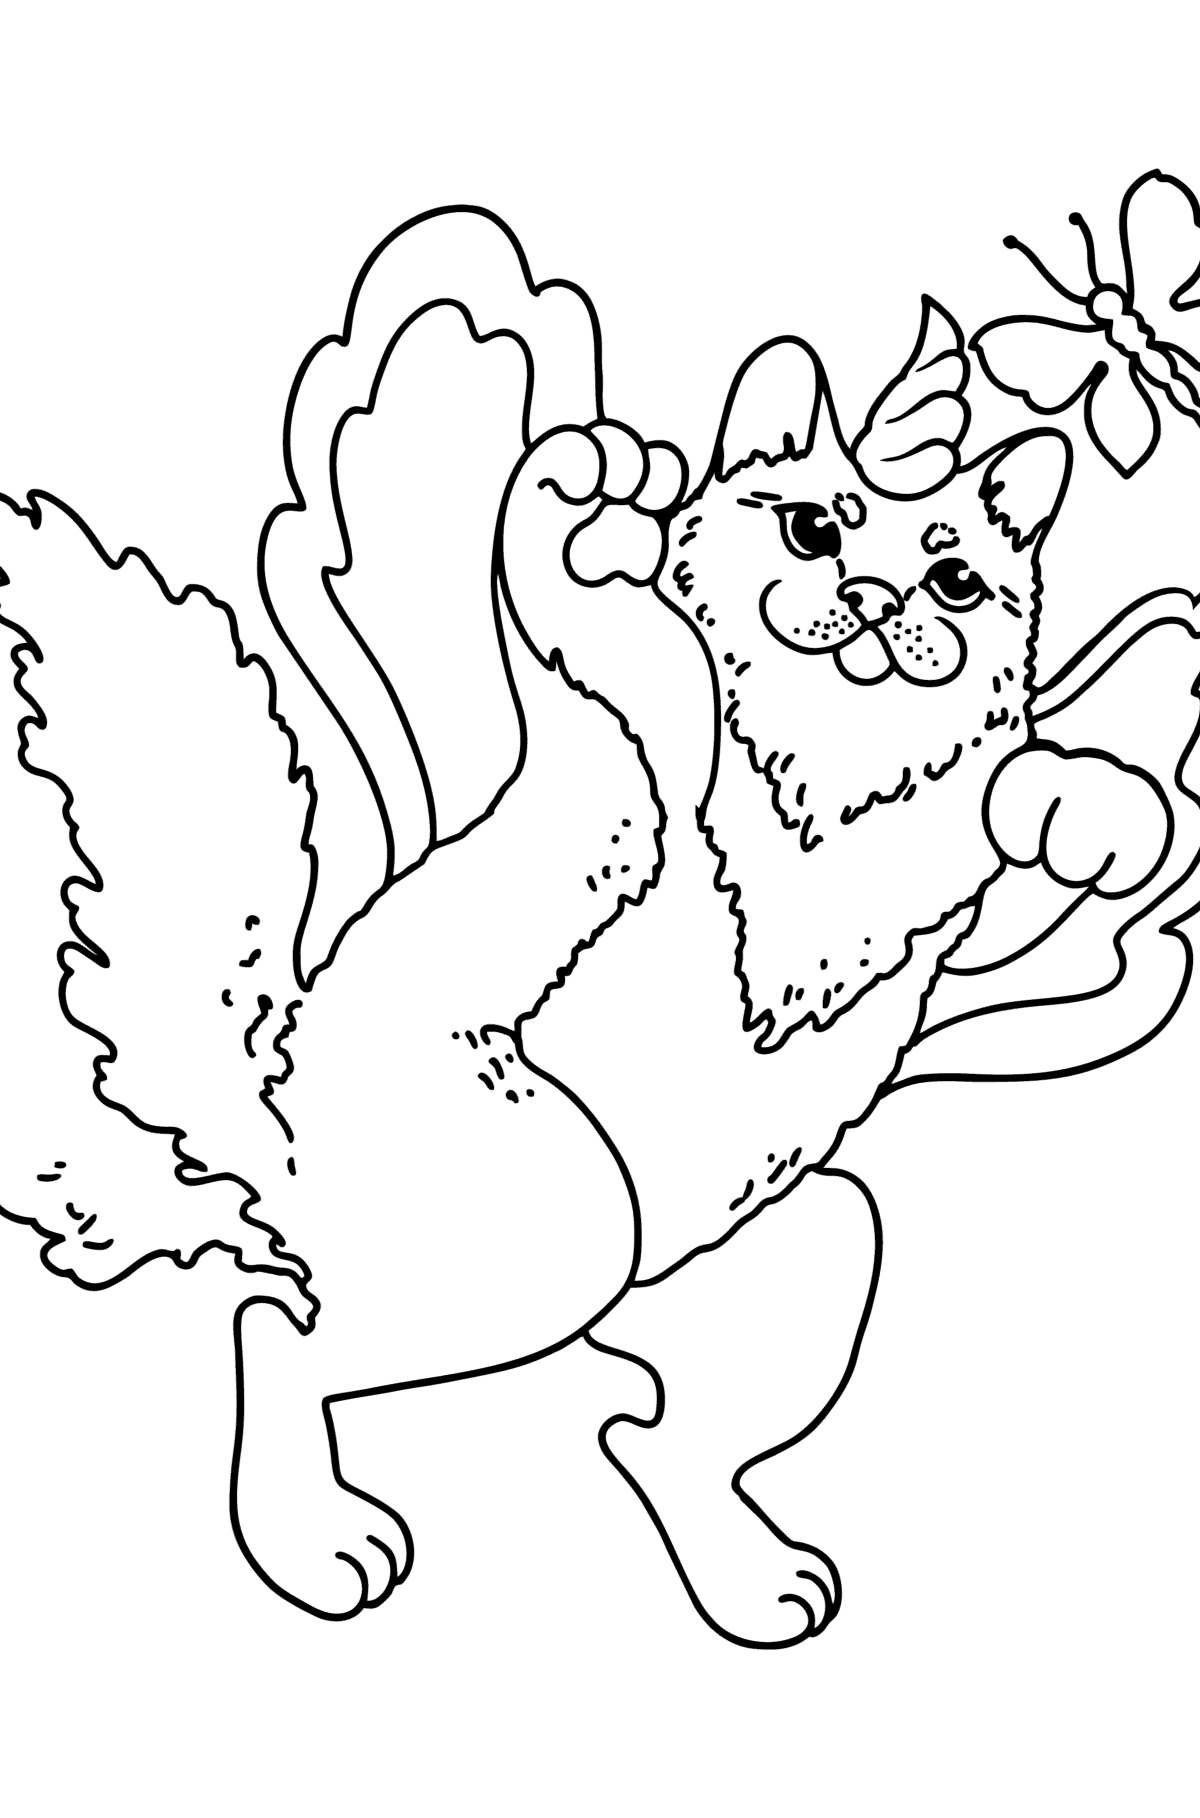 Cat Unicorn coloring page - Coloring Pages for Kids